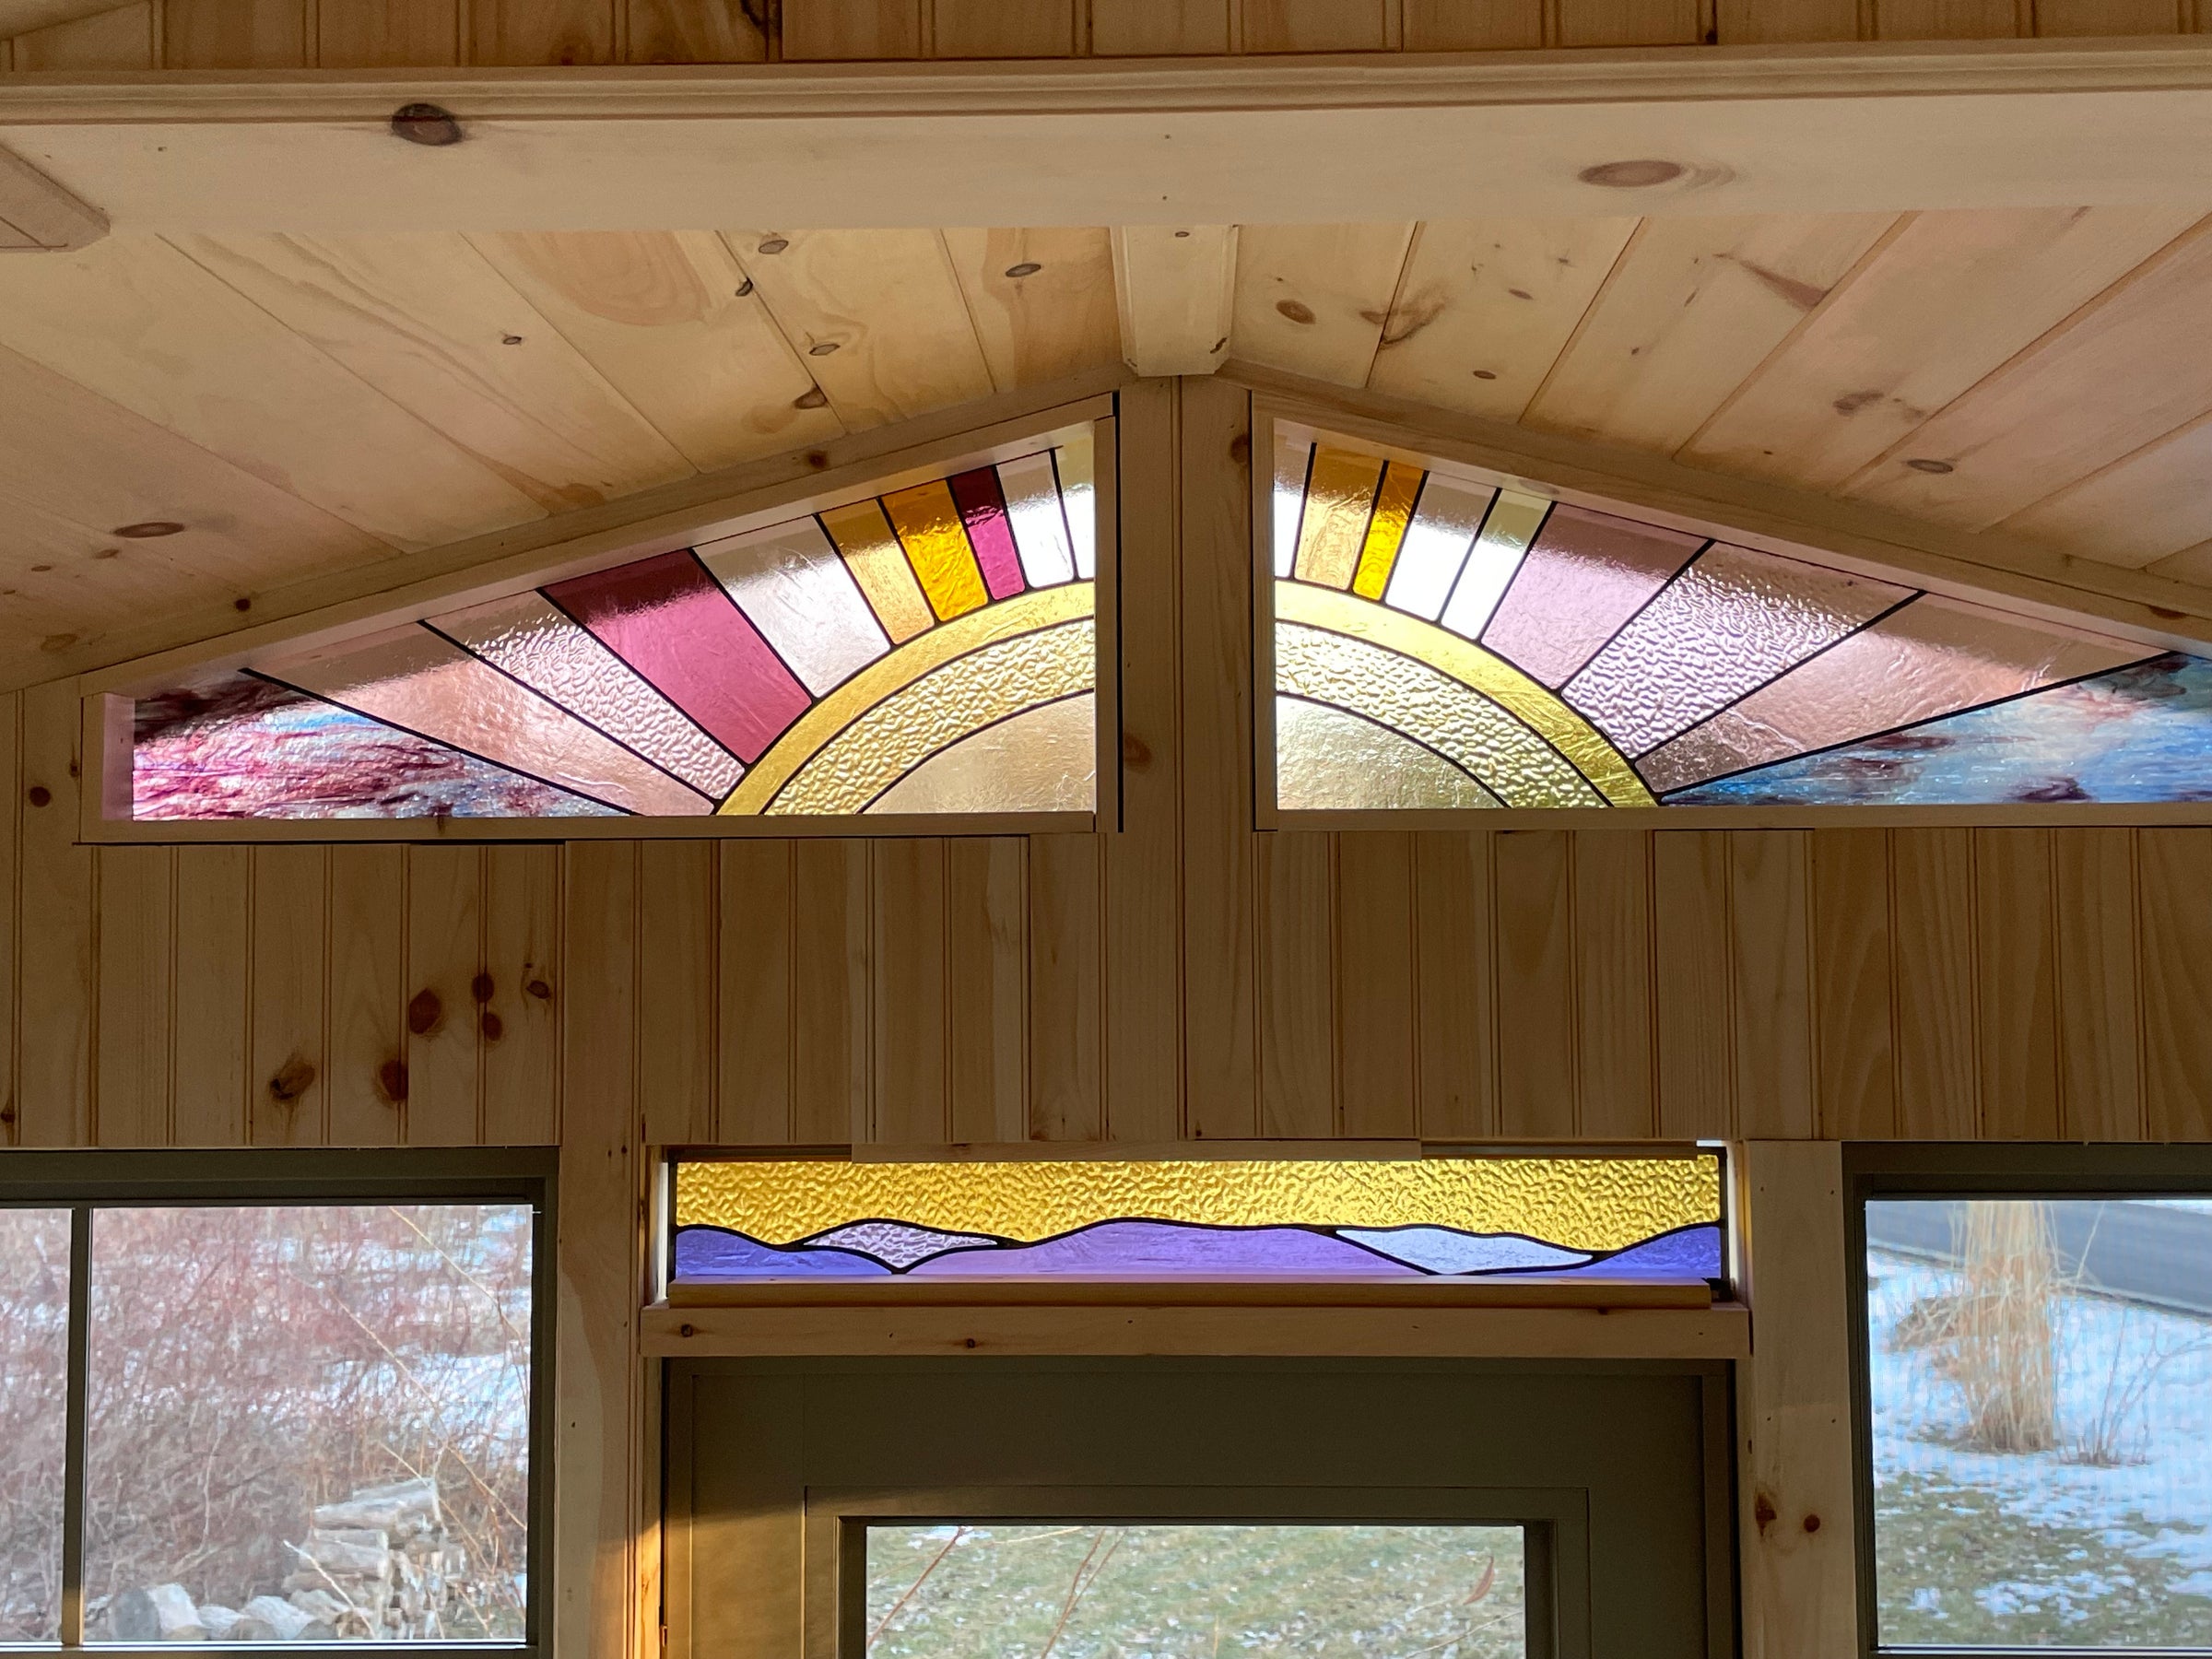 Make Your Own Stained Glass Window At Home!